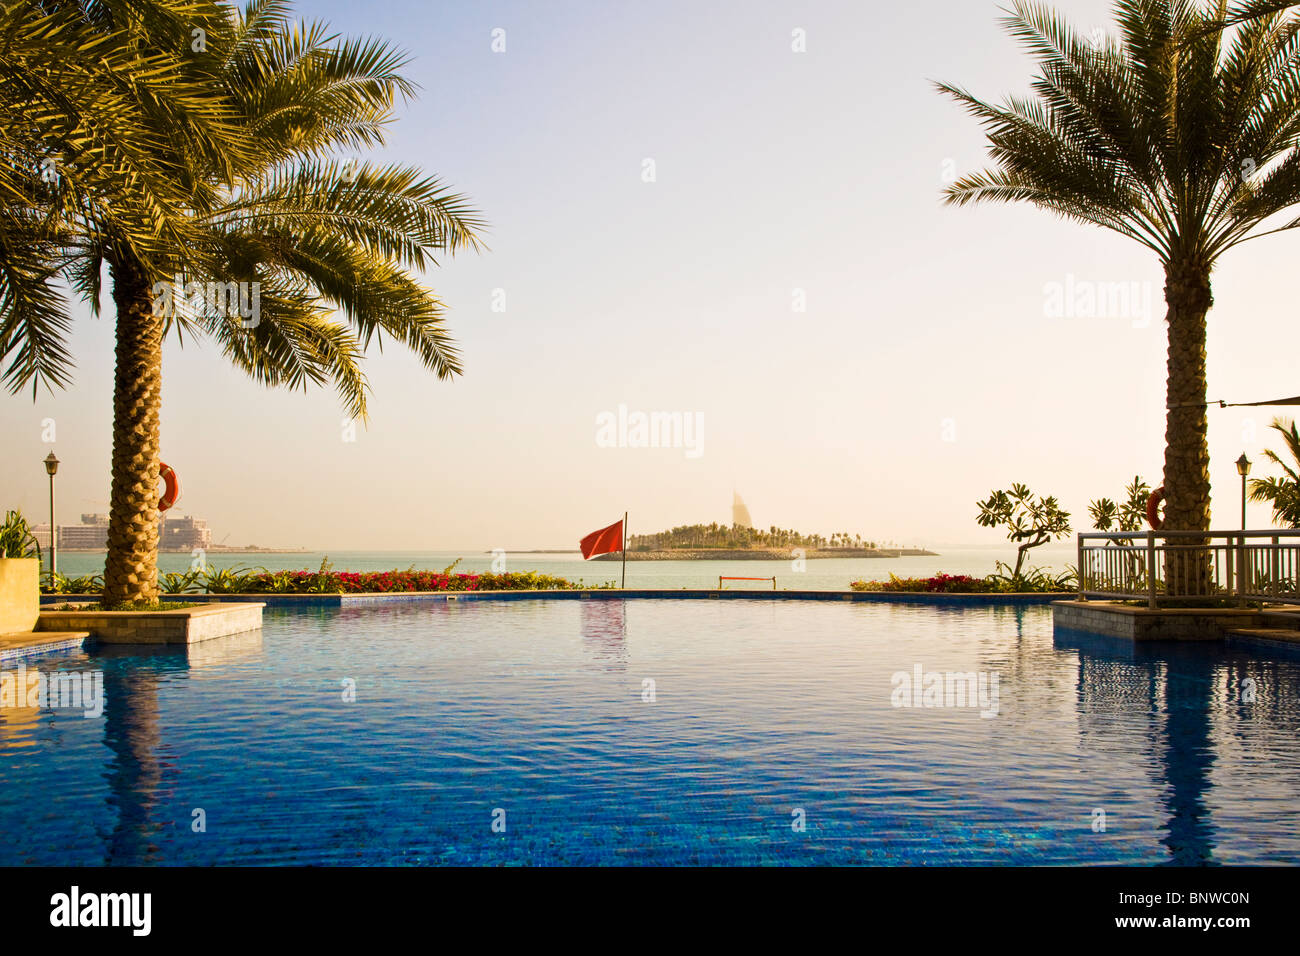 The infinity swimming pool in one of the beach clubs on the Palm Island Jumeira in Dubai. Burj al Arab visible in the distance. Stock Photo